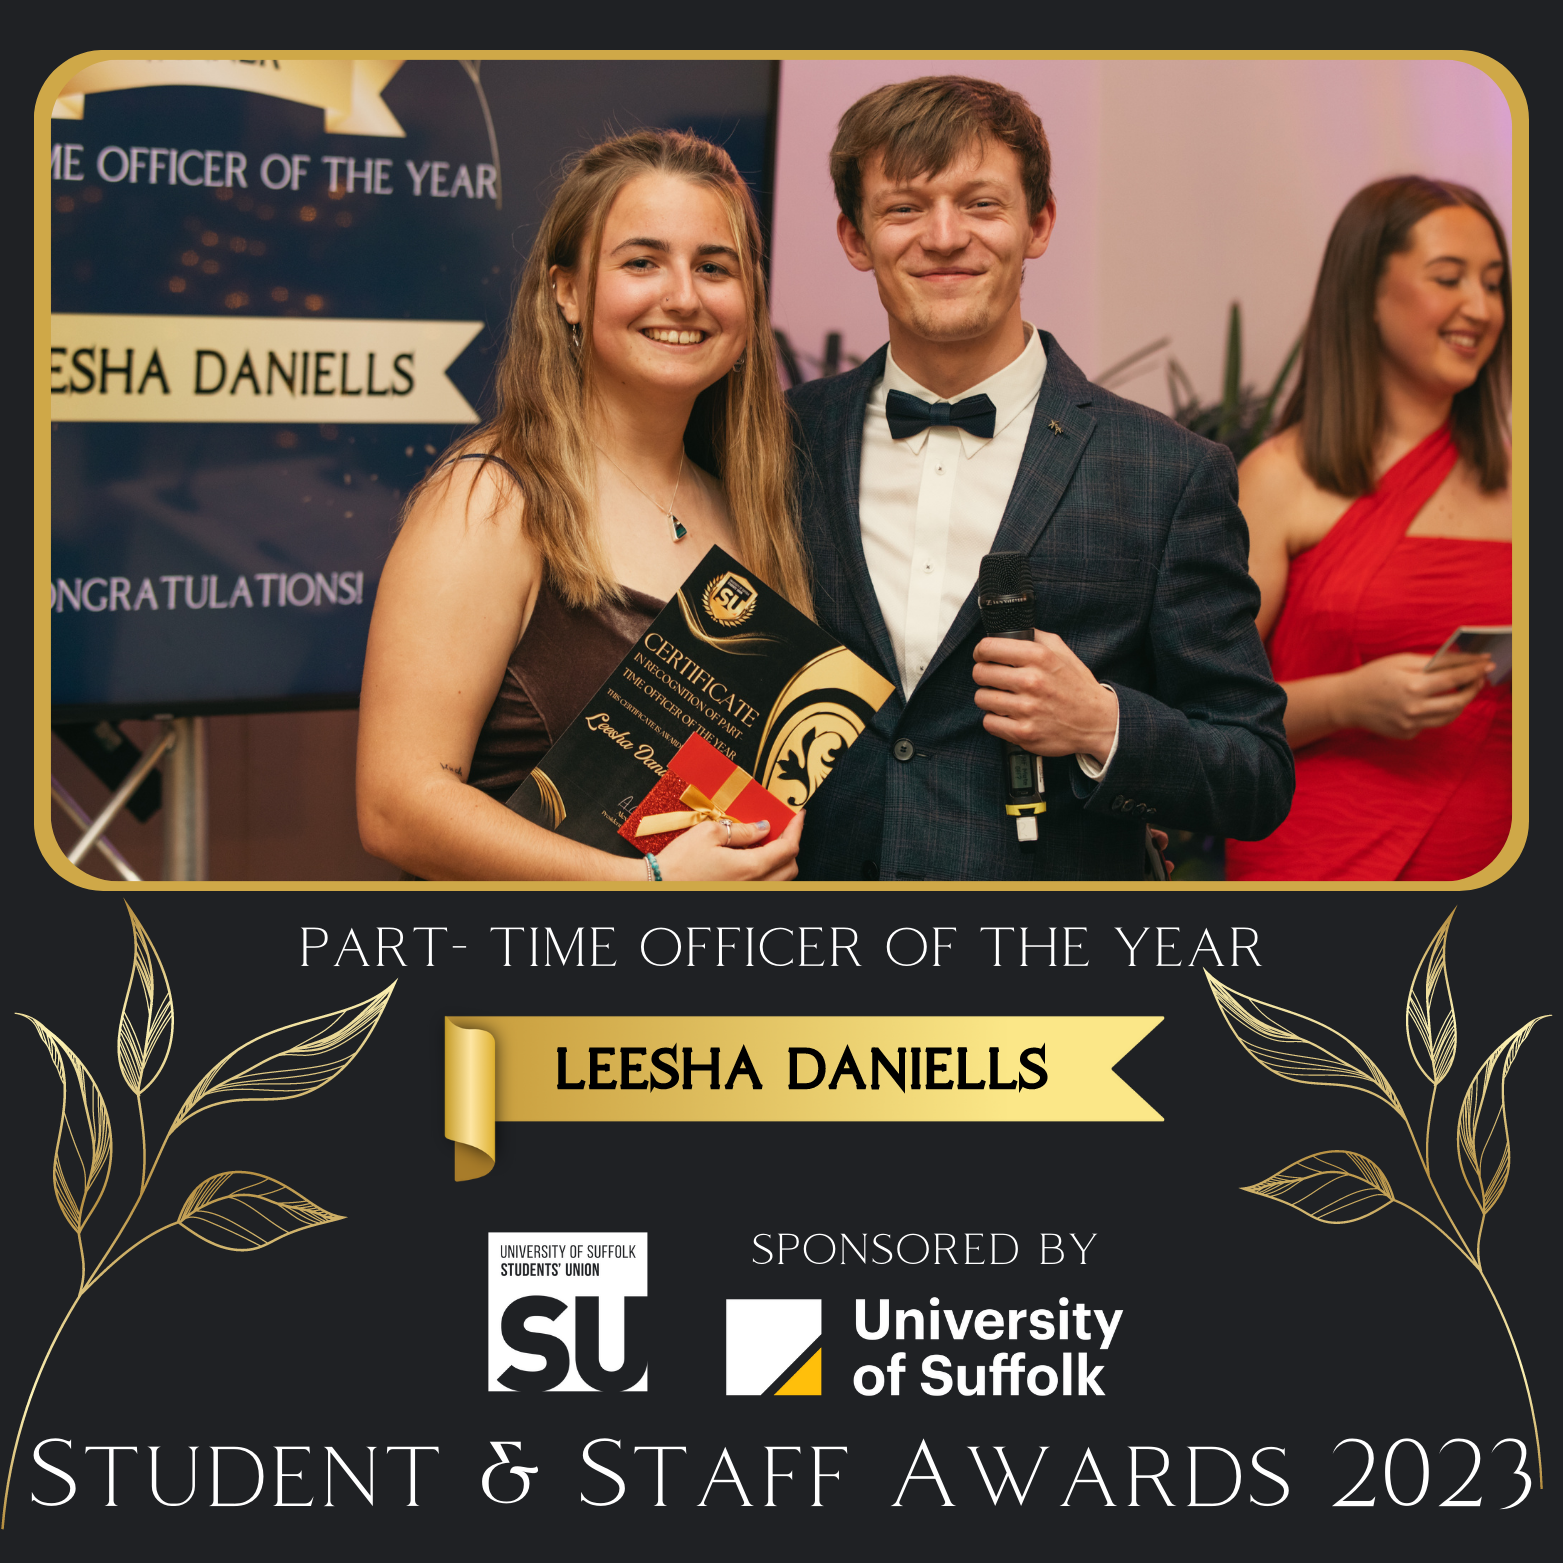 part-time officer of the year, leesha daneills, pictured holding her certificate with previous su president alex gooch